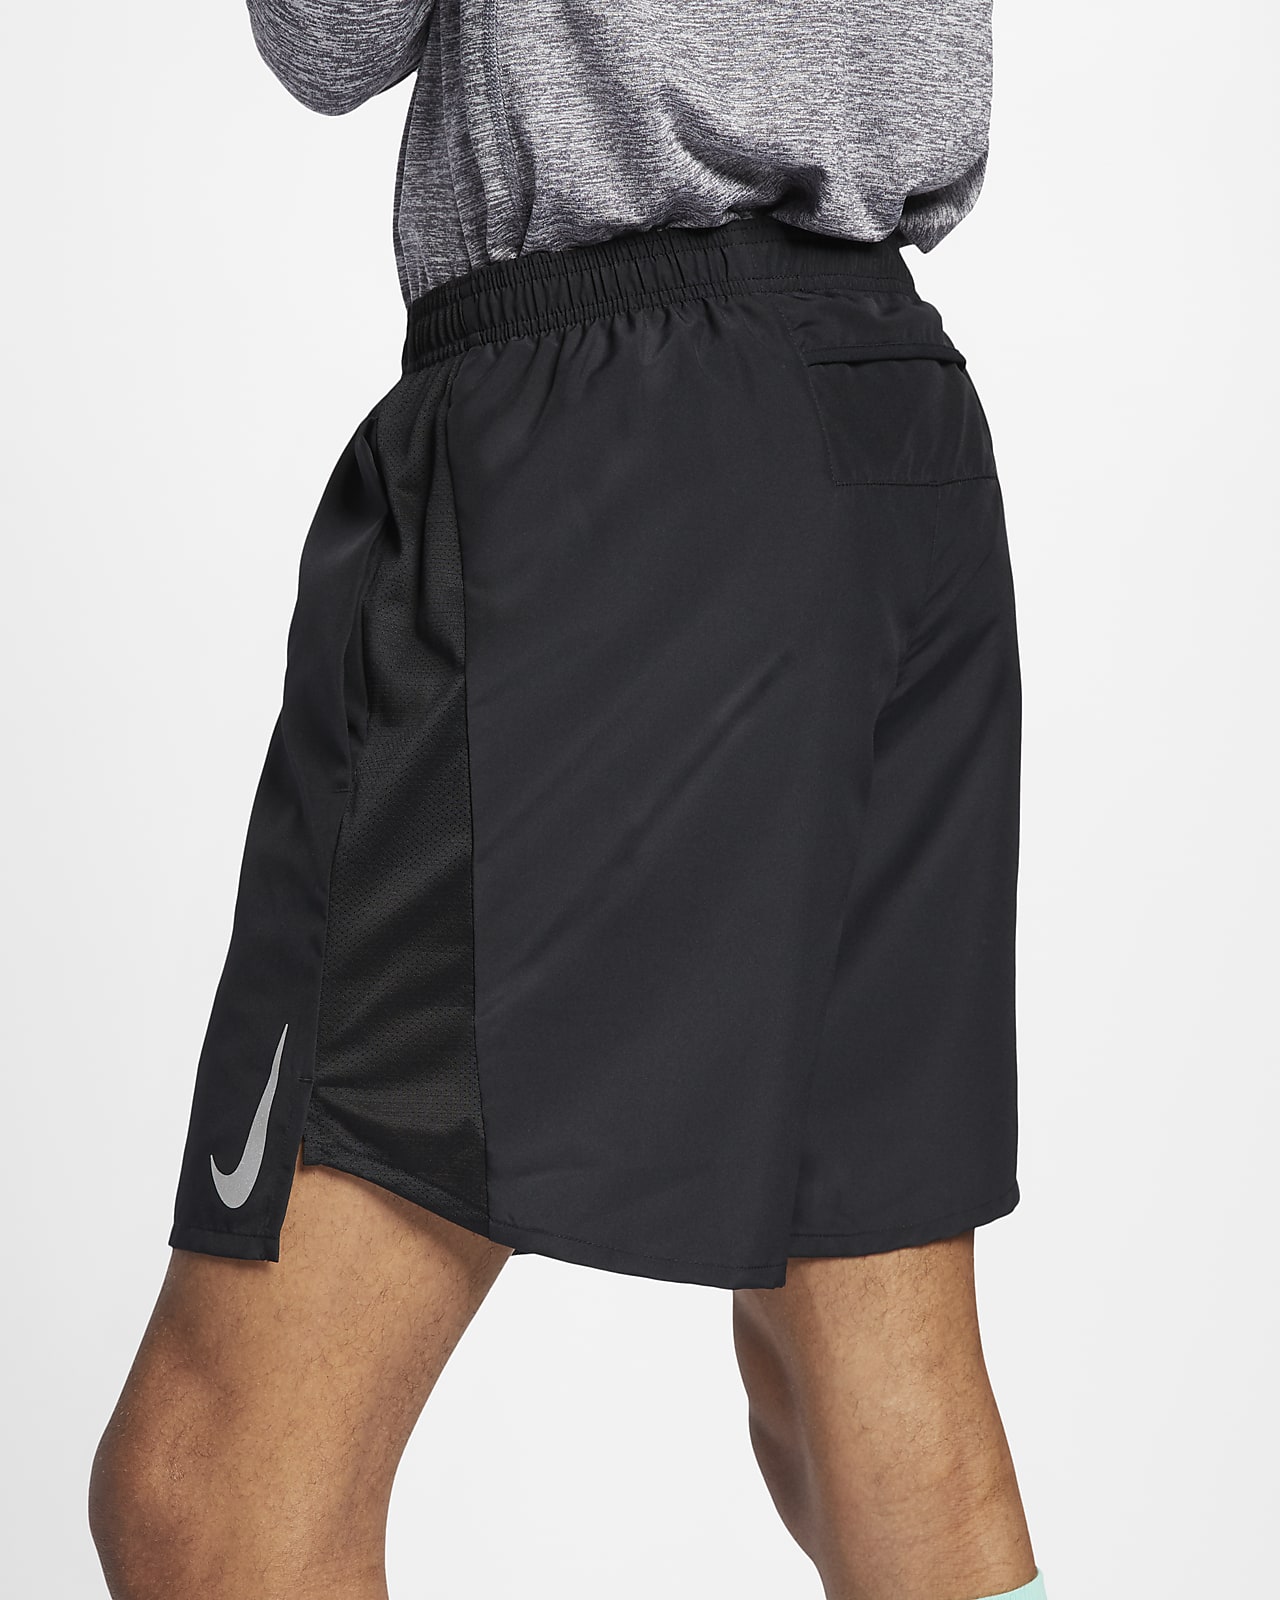 nike 9 inch challenger shorts